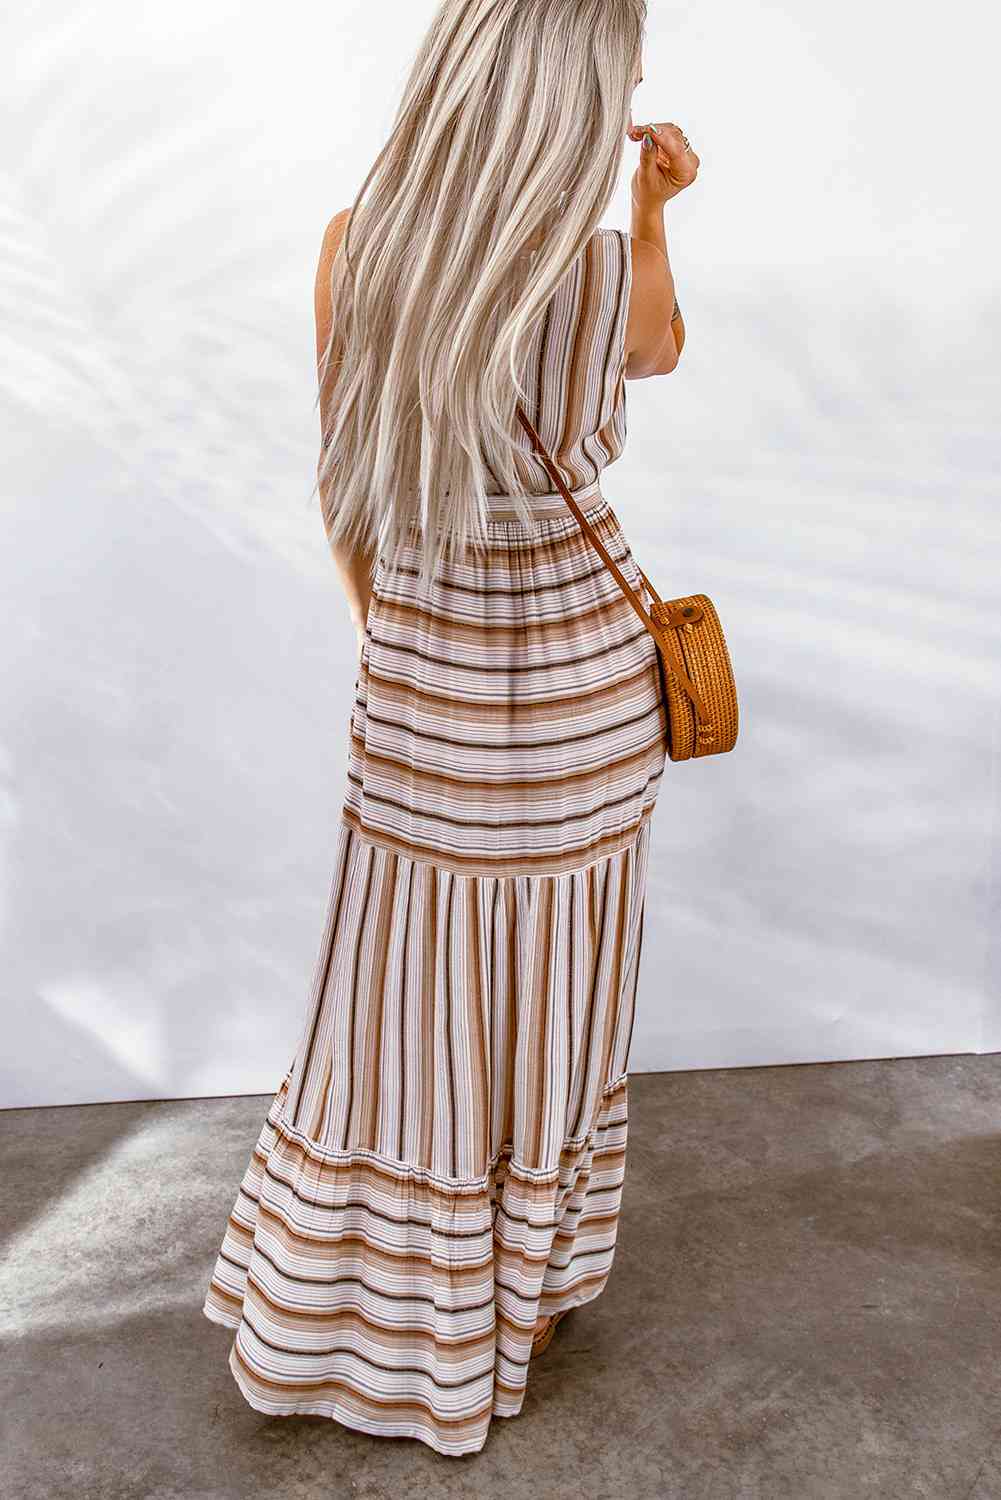 In the Meantime Striped Tie Waist Slit Sleeveless Dress